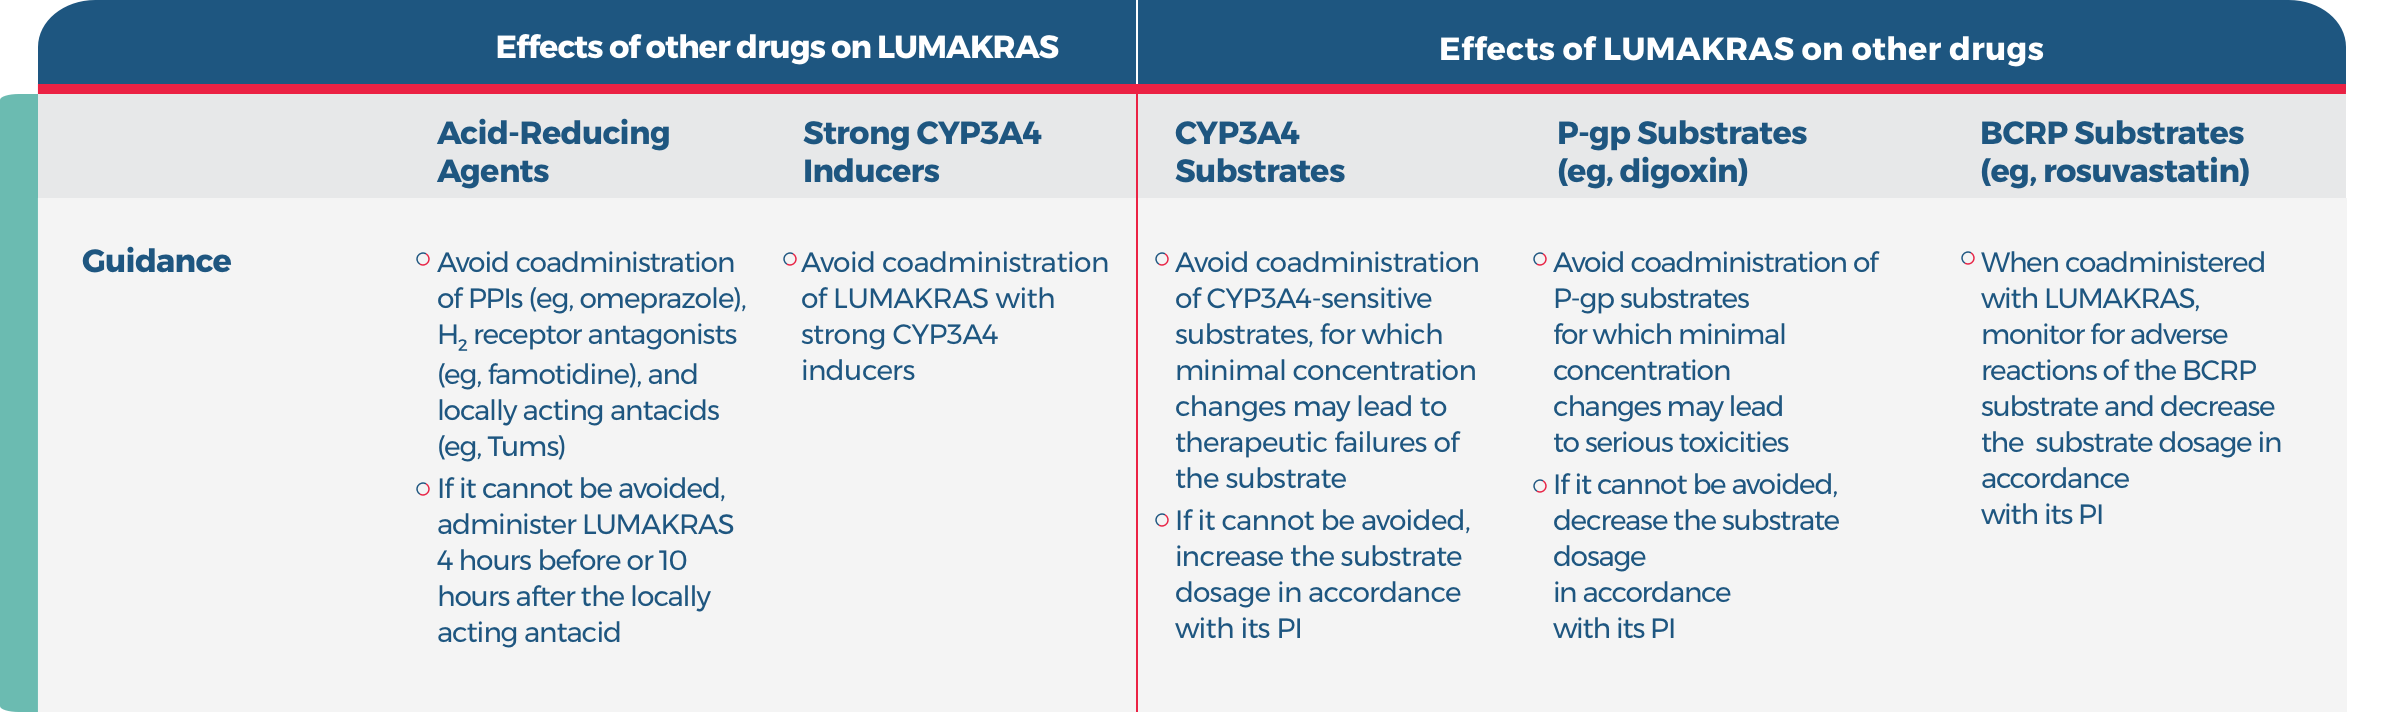 chart highlighting effects of other drugs on LUMAKRAS